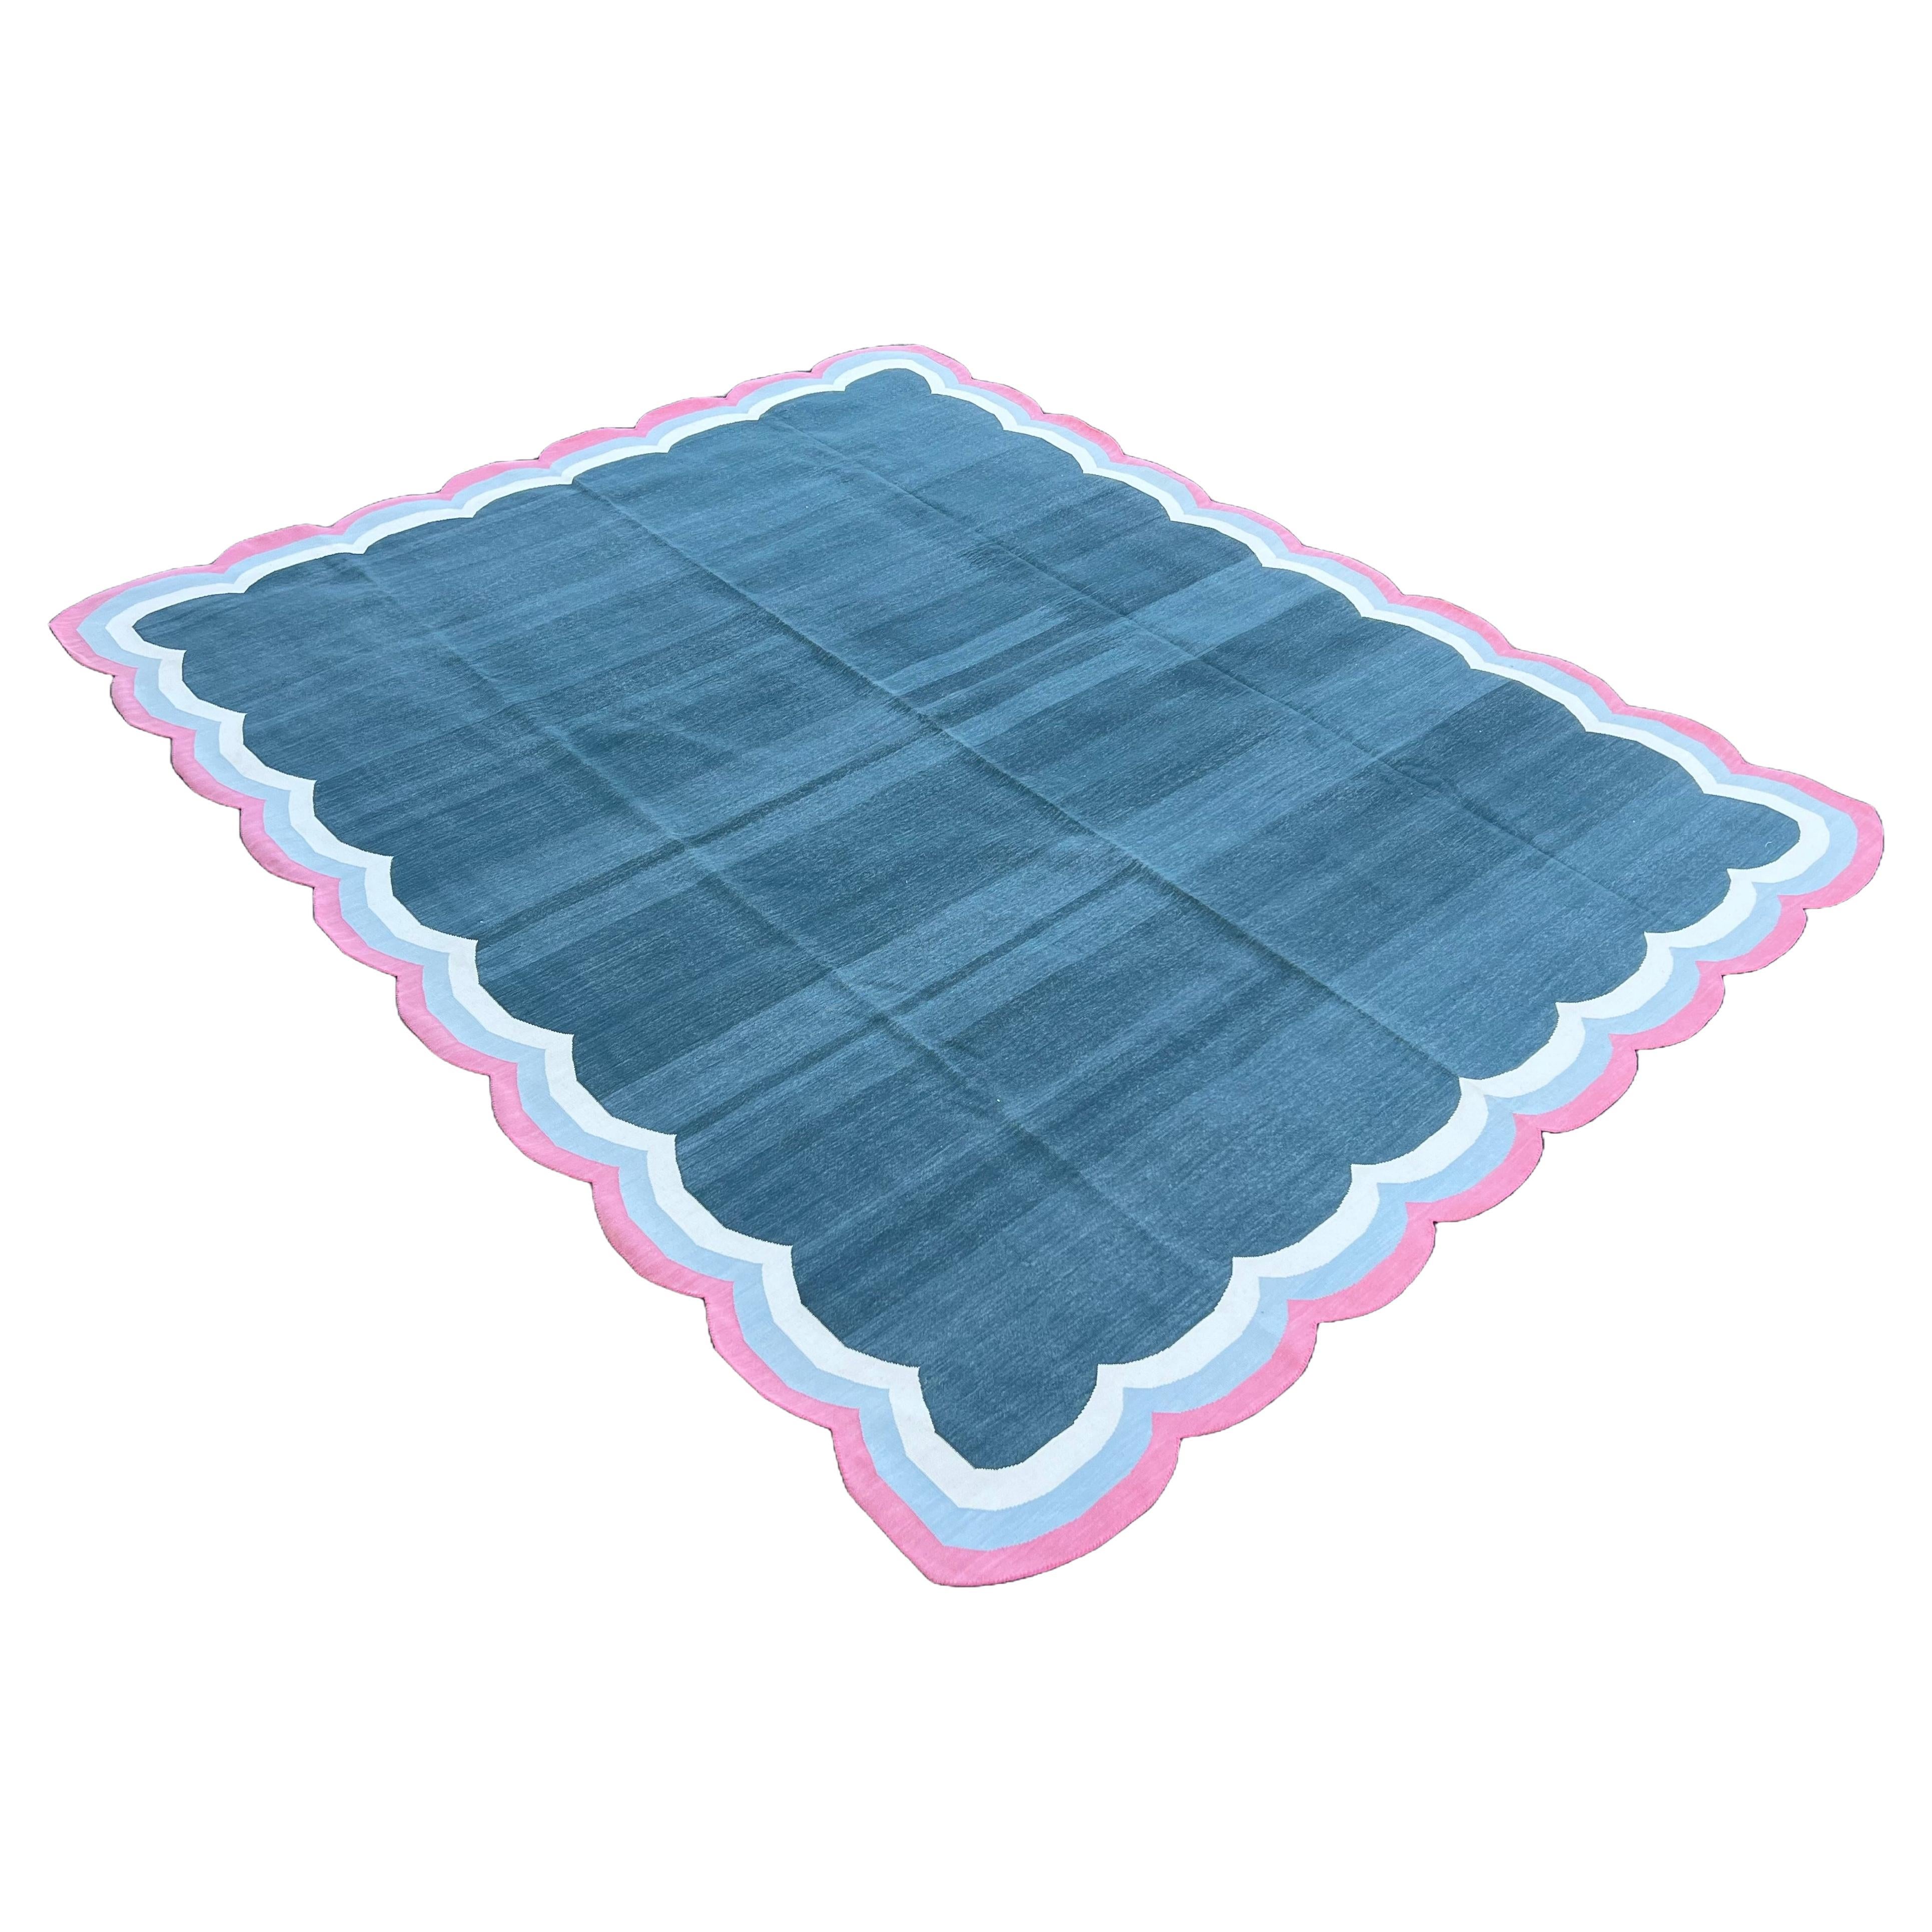 Handmade Cotton Area Flat Weave Rug, 8x10 Blue And Pink Scalloped Indian Dhurrie For Sale